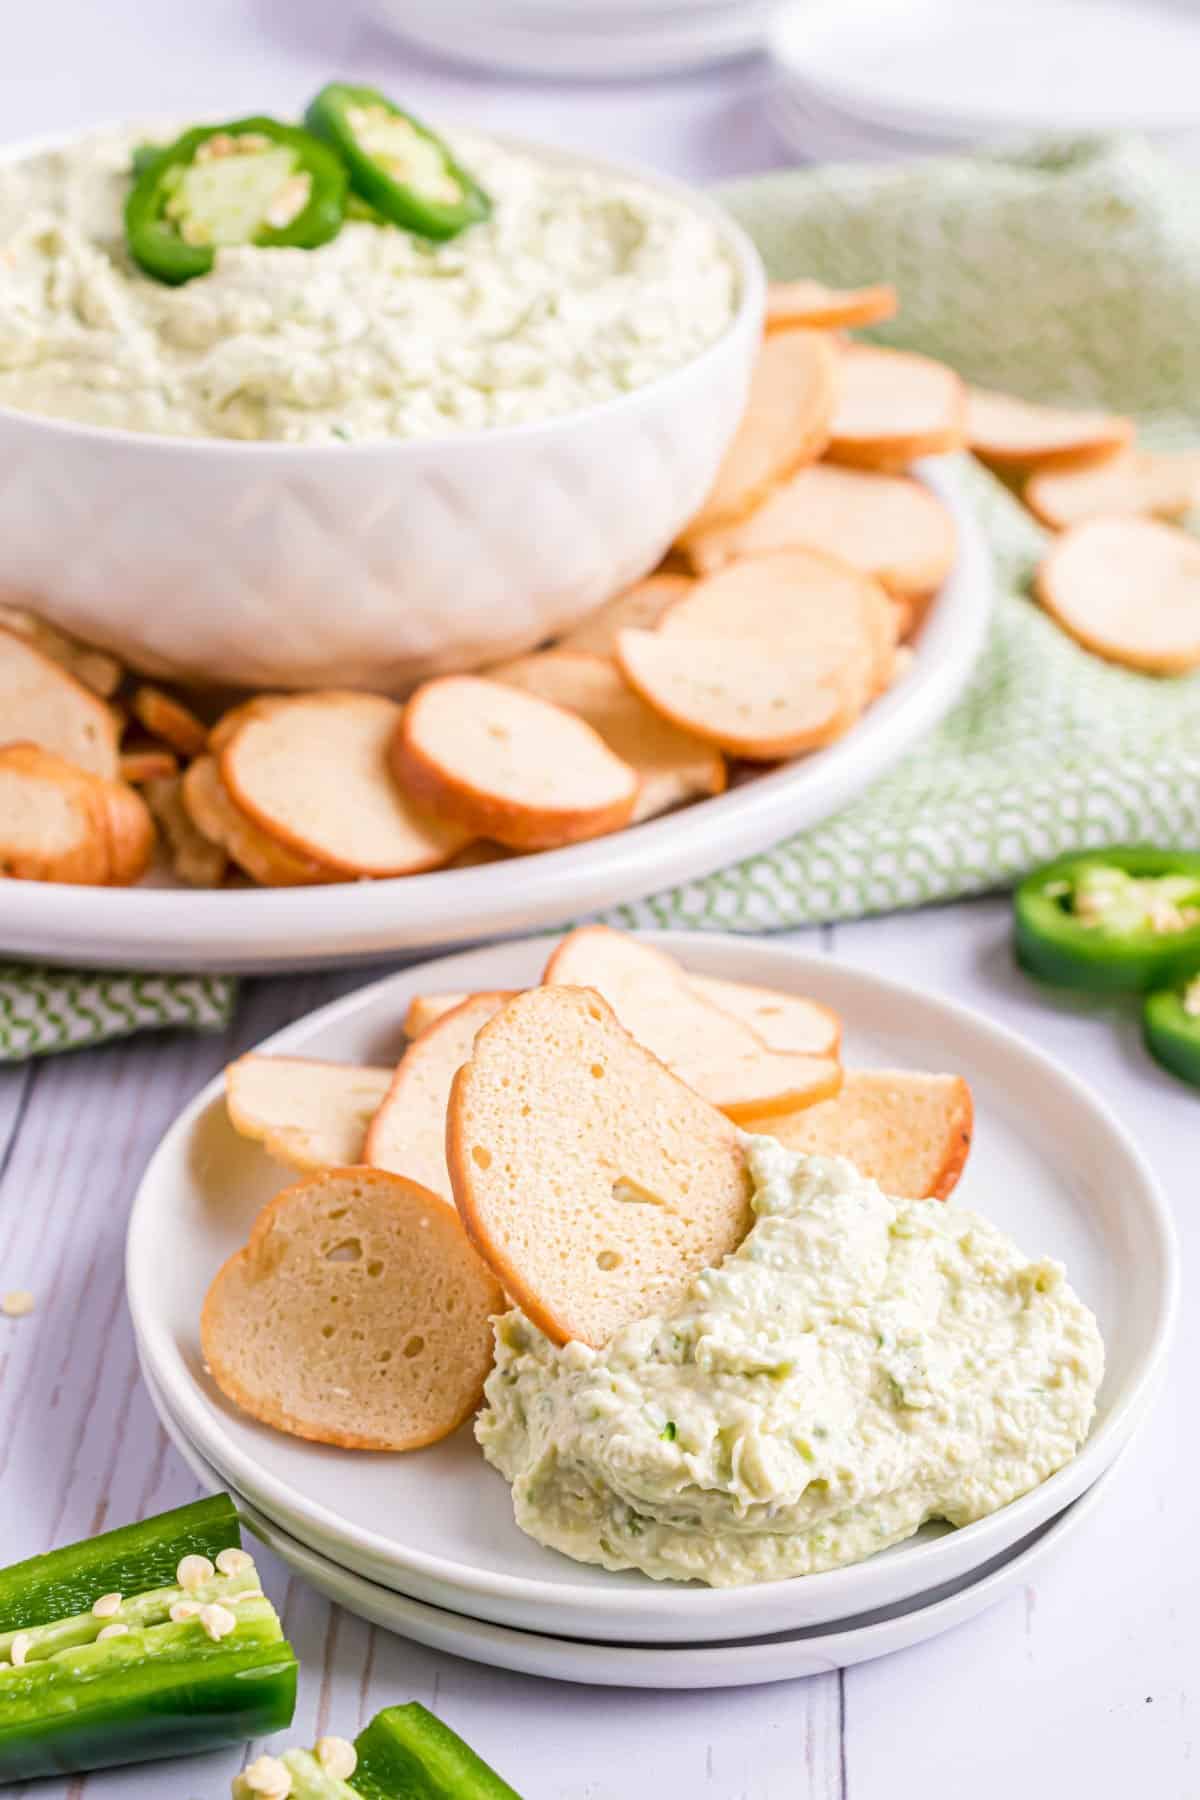 Artichoke jalapeno dip served on a plate with bagel chips.